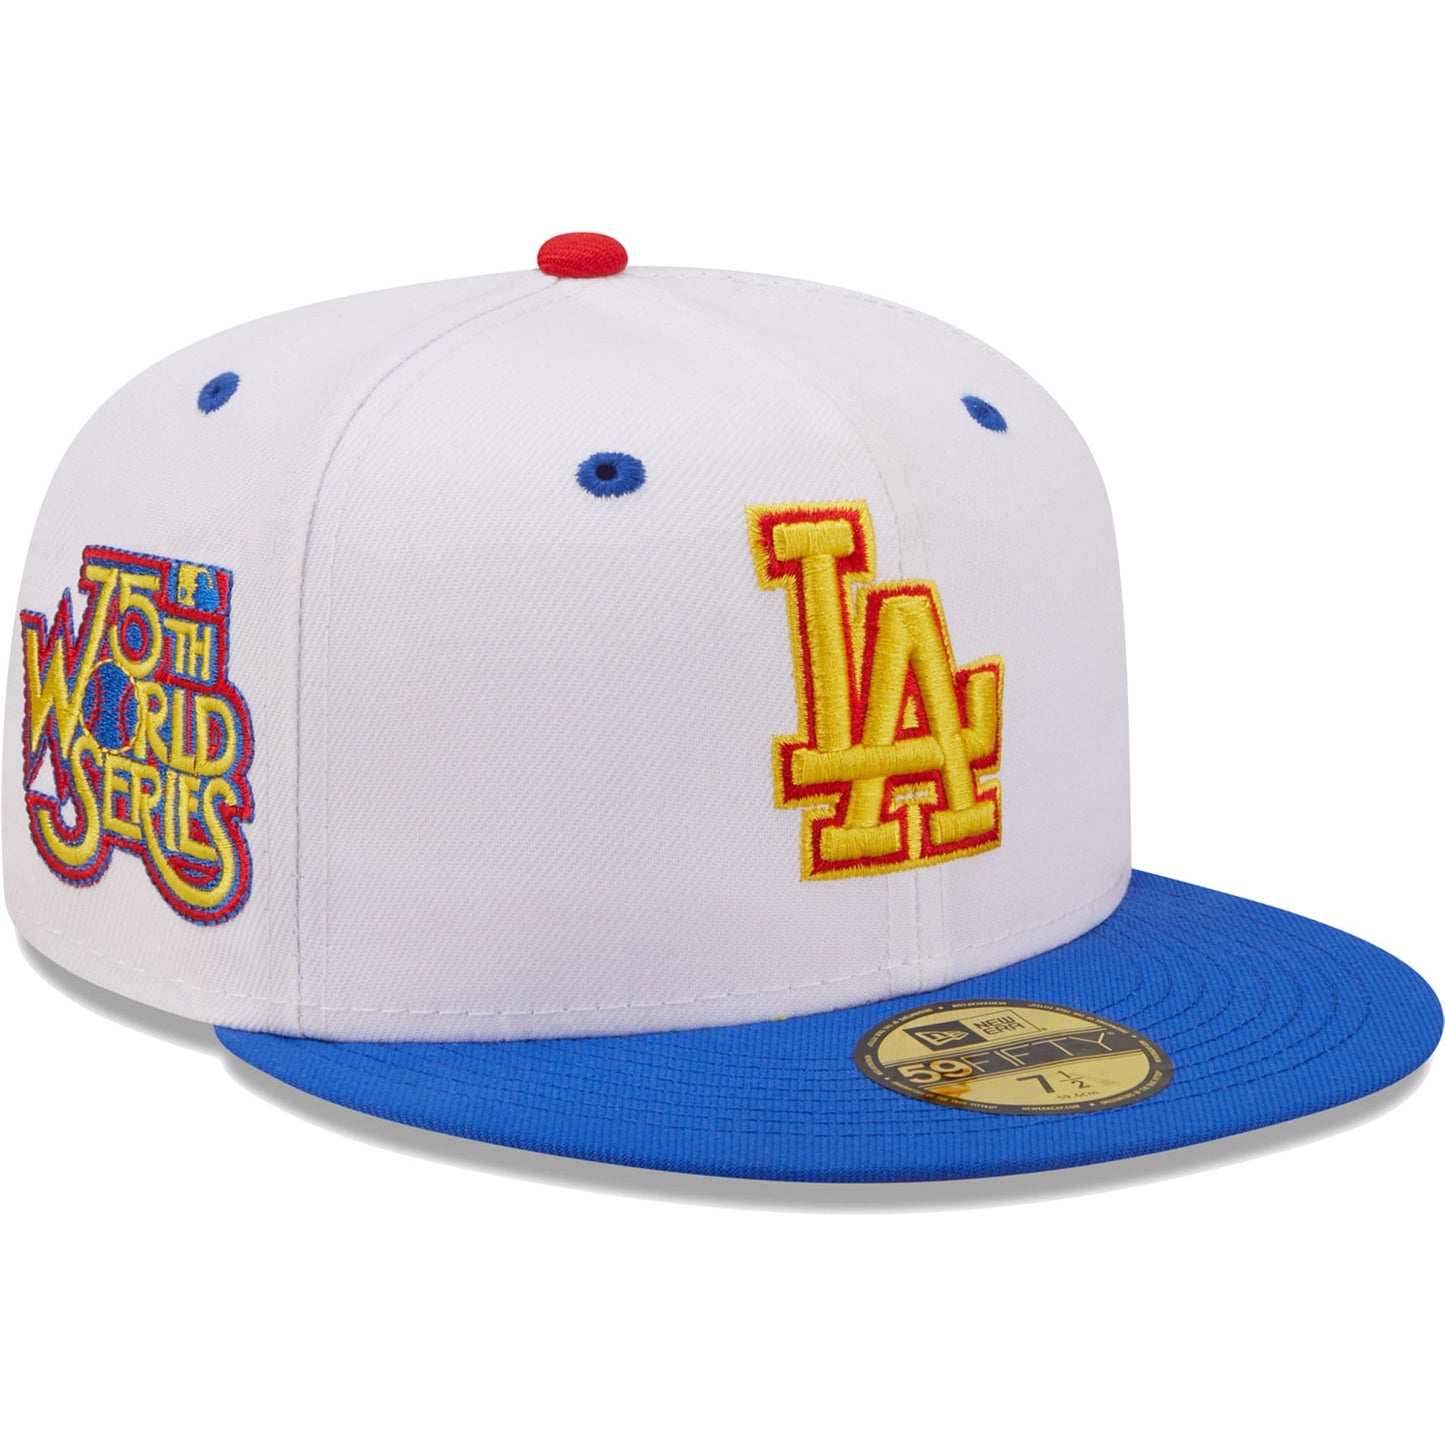 Los Angeles Dodgers New Era 75th World Series Cherry Lolli 59FIFTY Fitted Hat - White/Royal